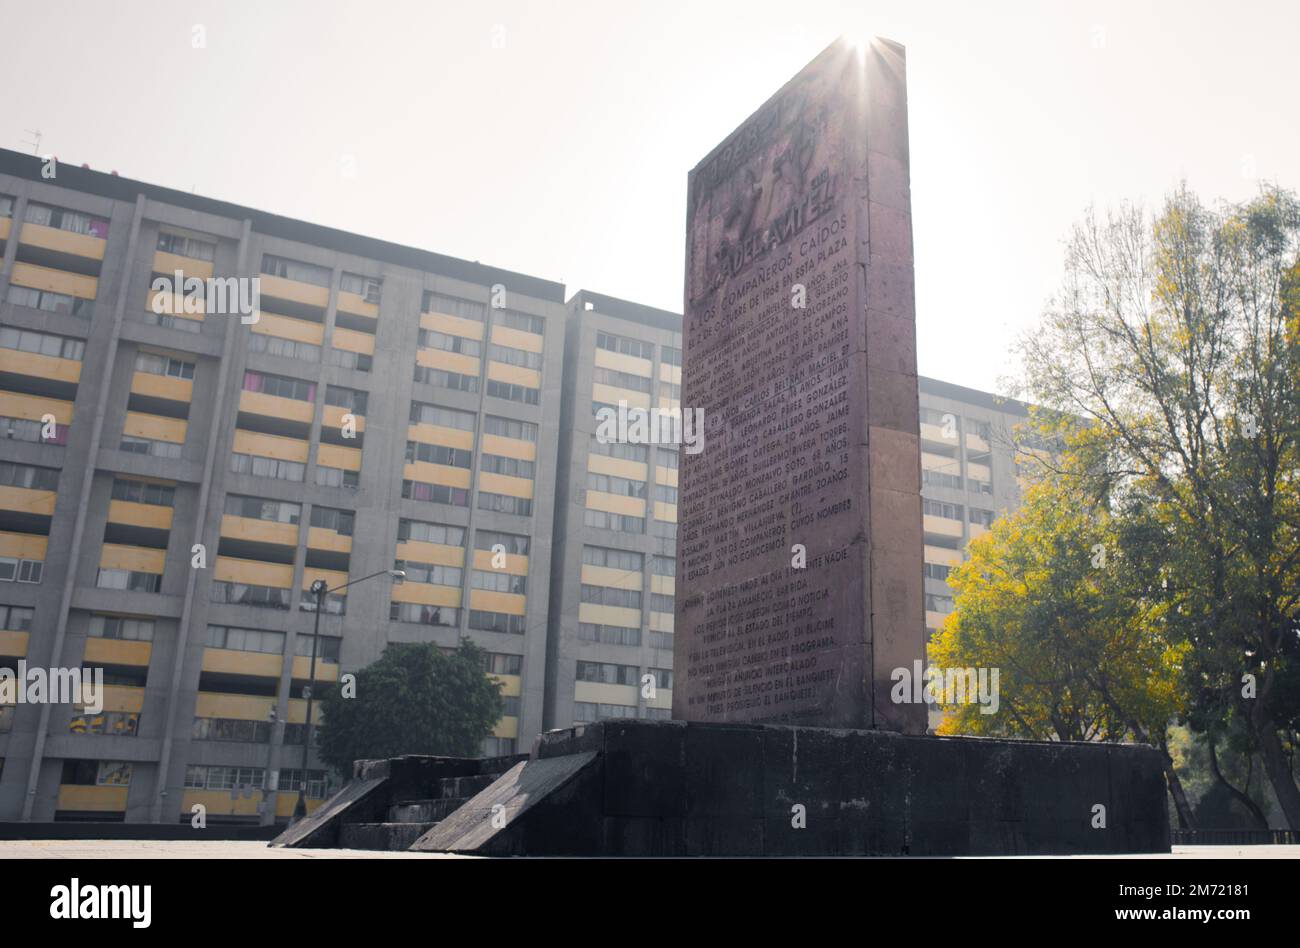 Tlatelolco, CDMX, 10 12 22, Monument to the students in the Plaza de las Tres Culturas with a building in the background, no people Stock Photo